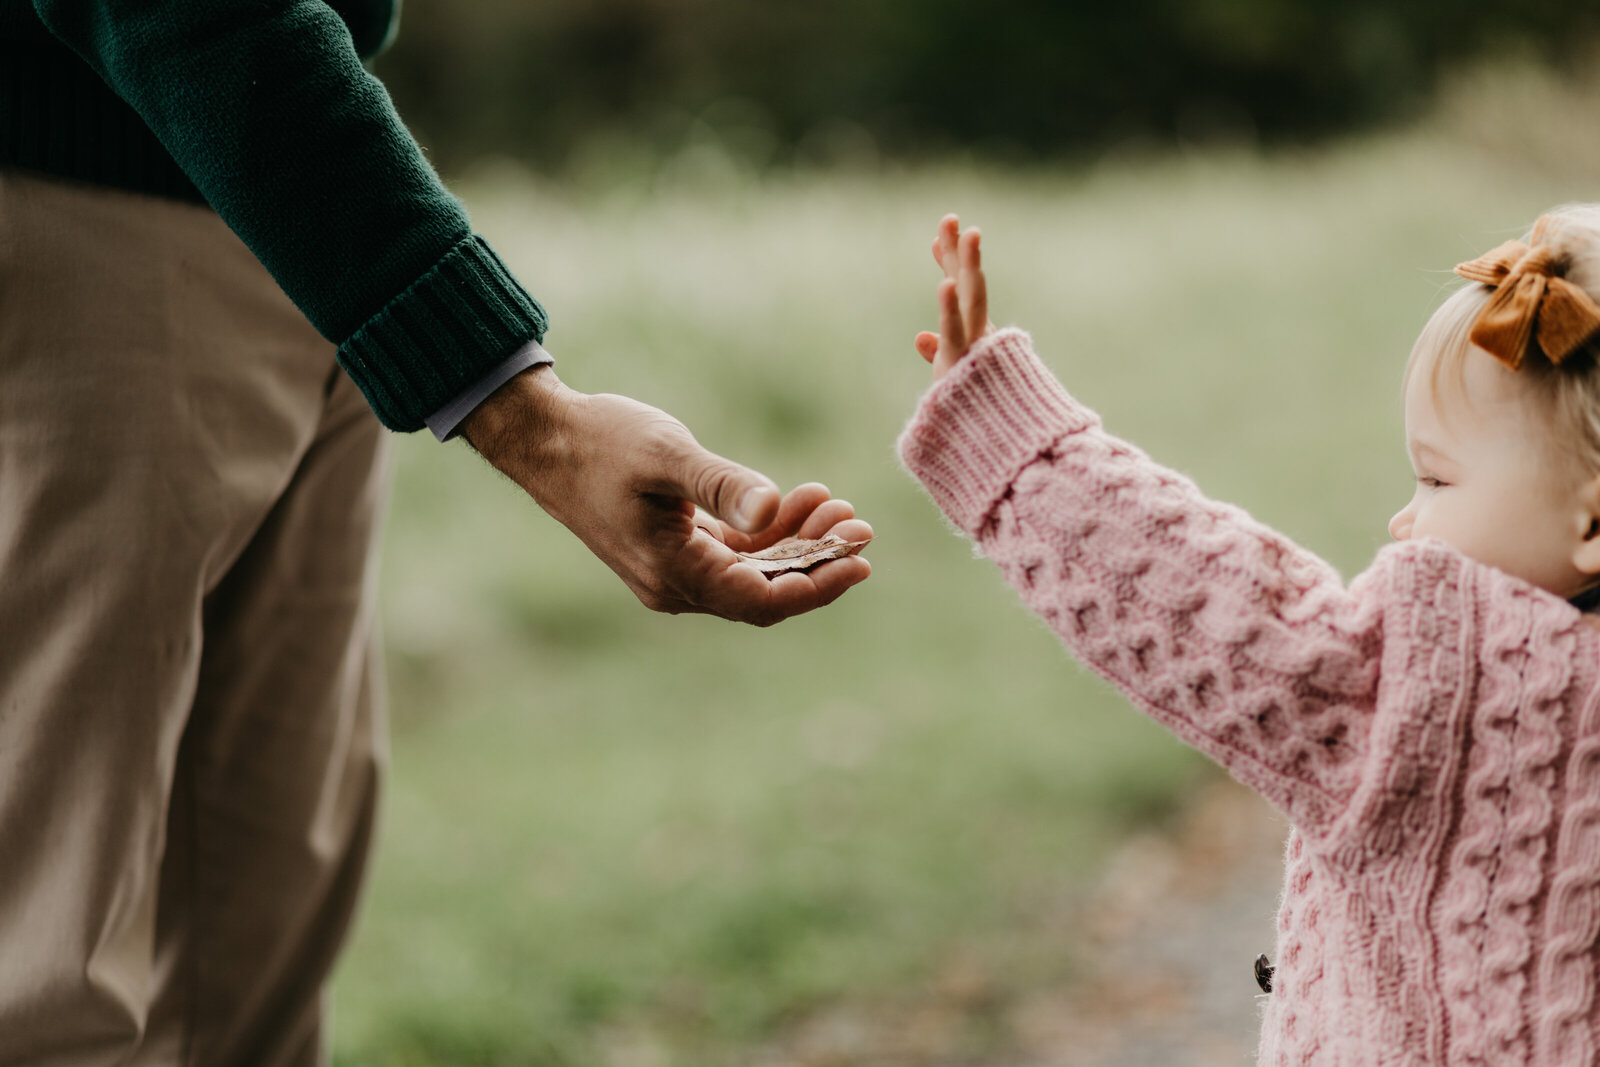 A small child hands a leaf to her father